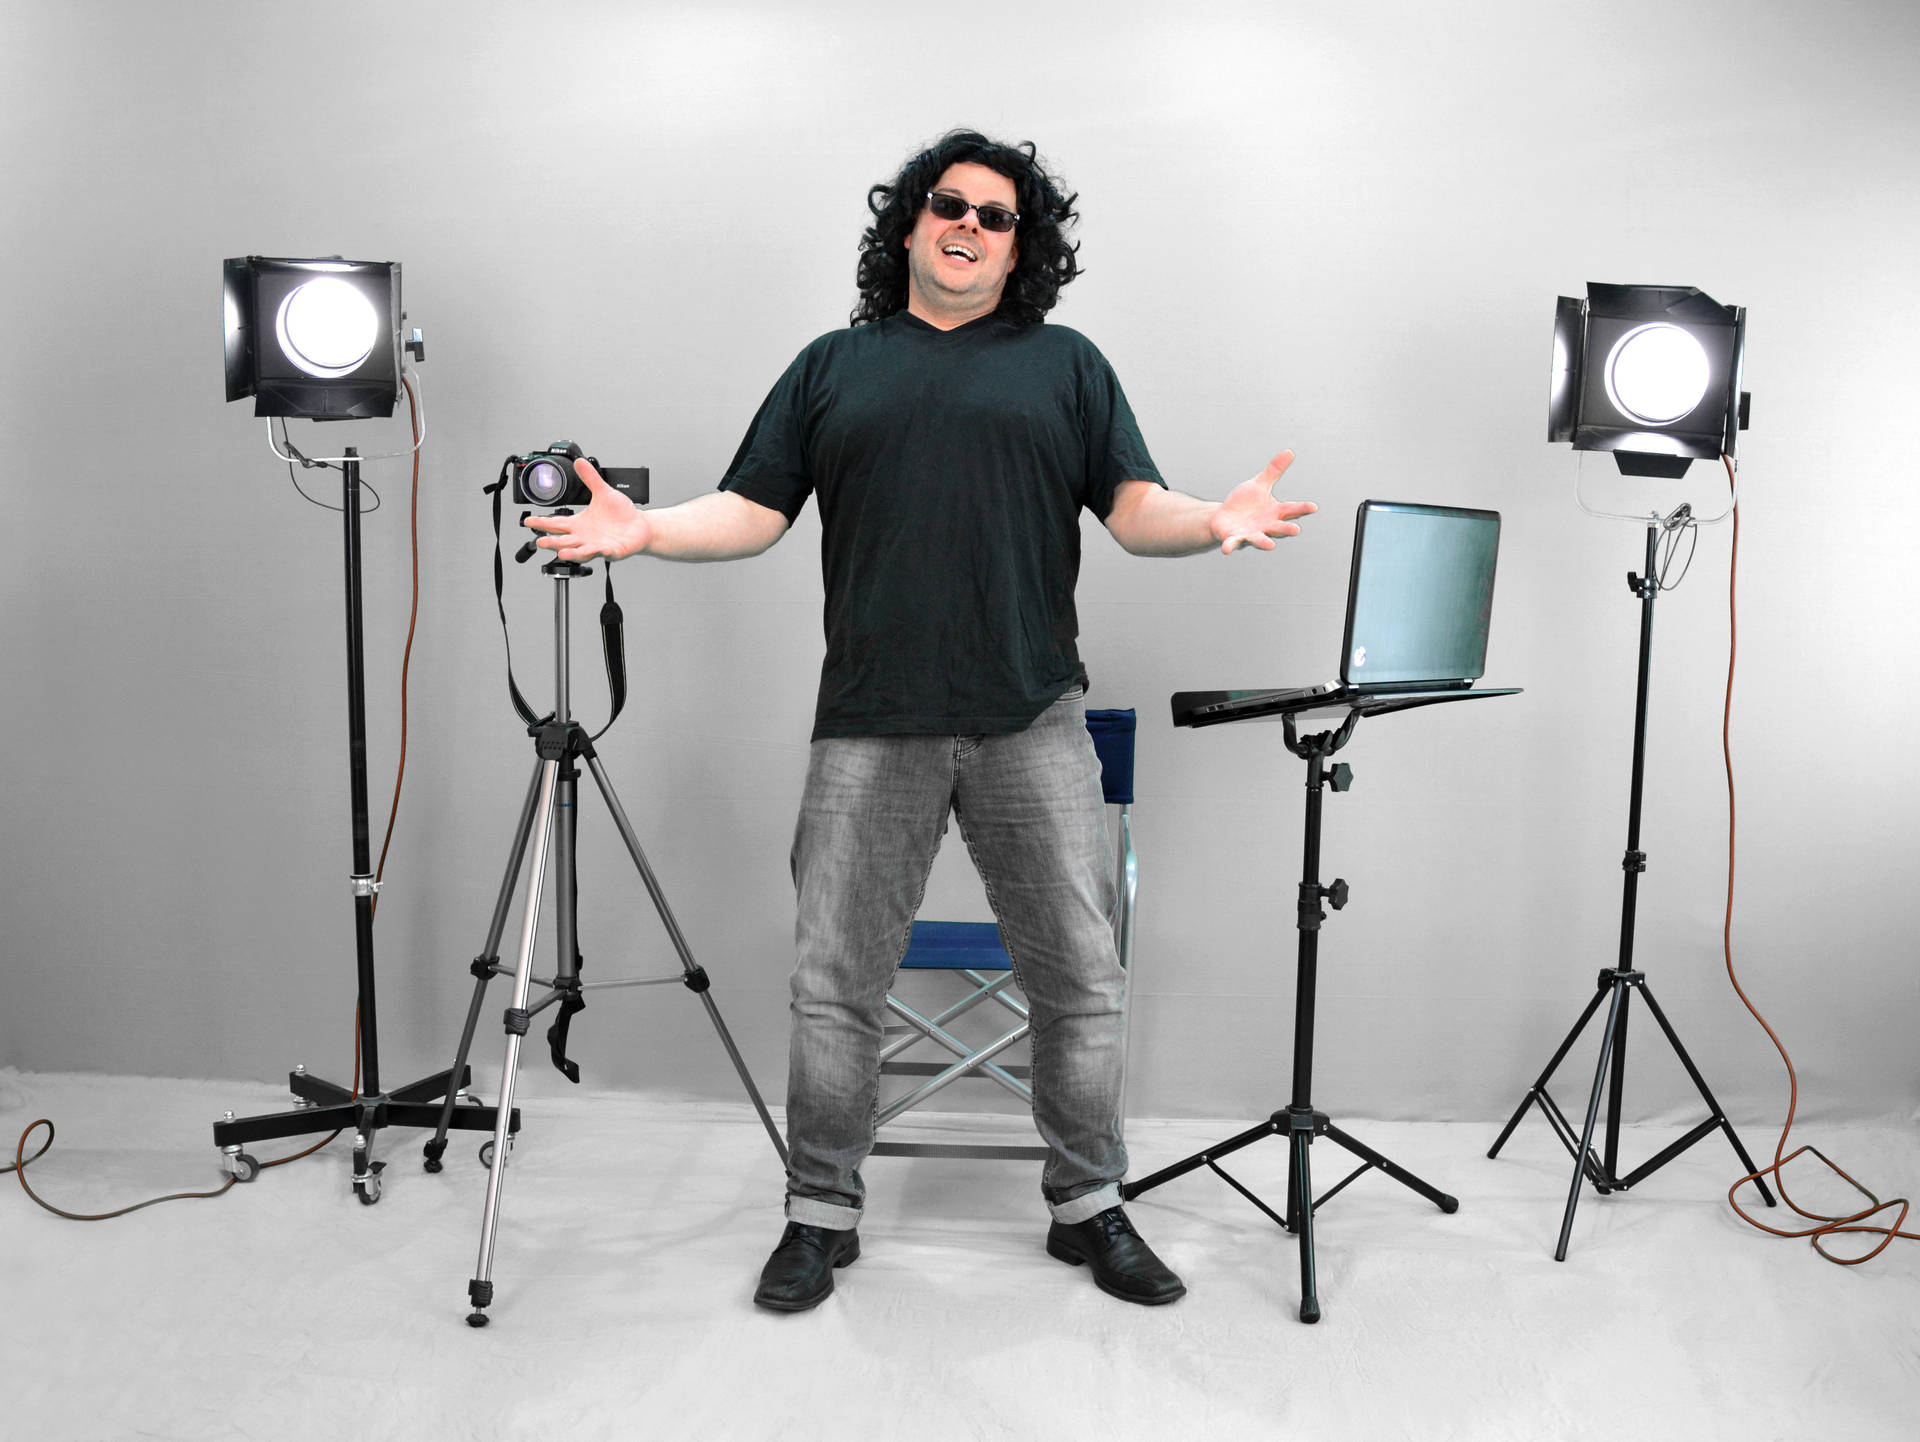 Man In Photography Studio Background